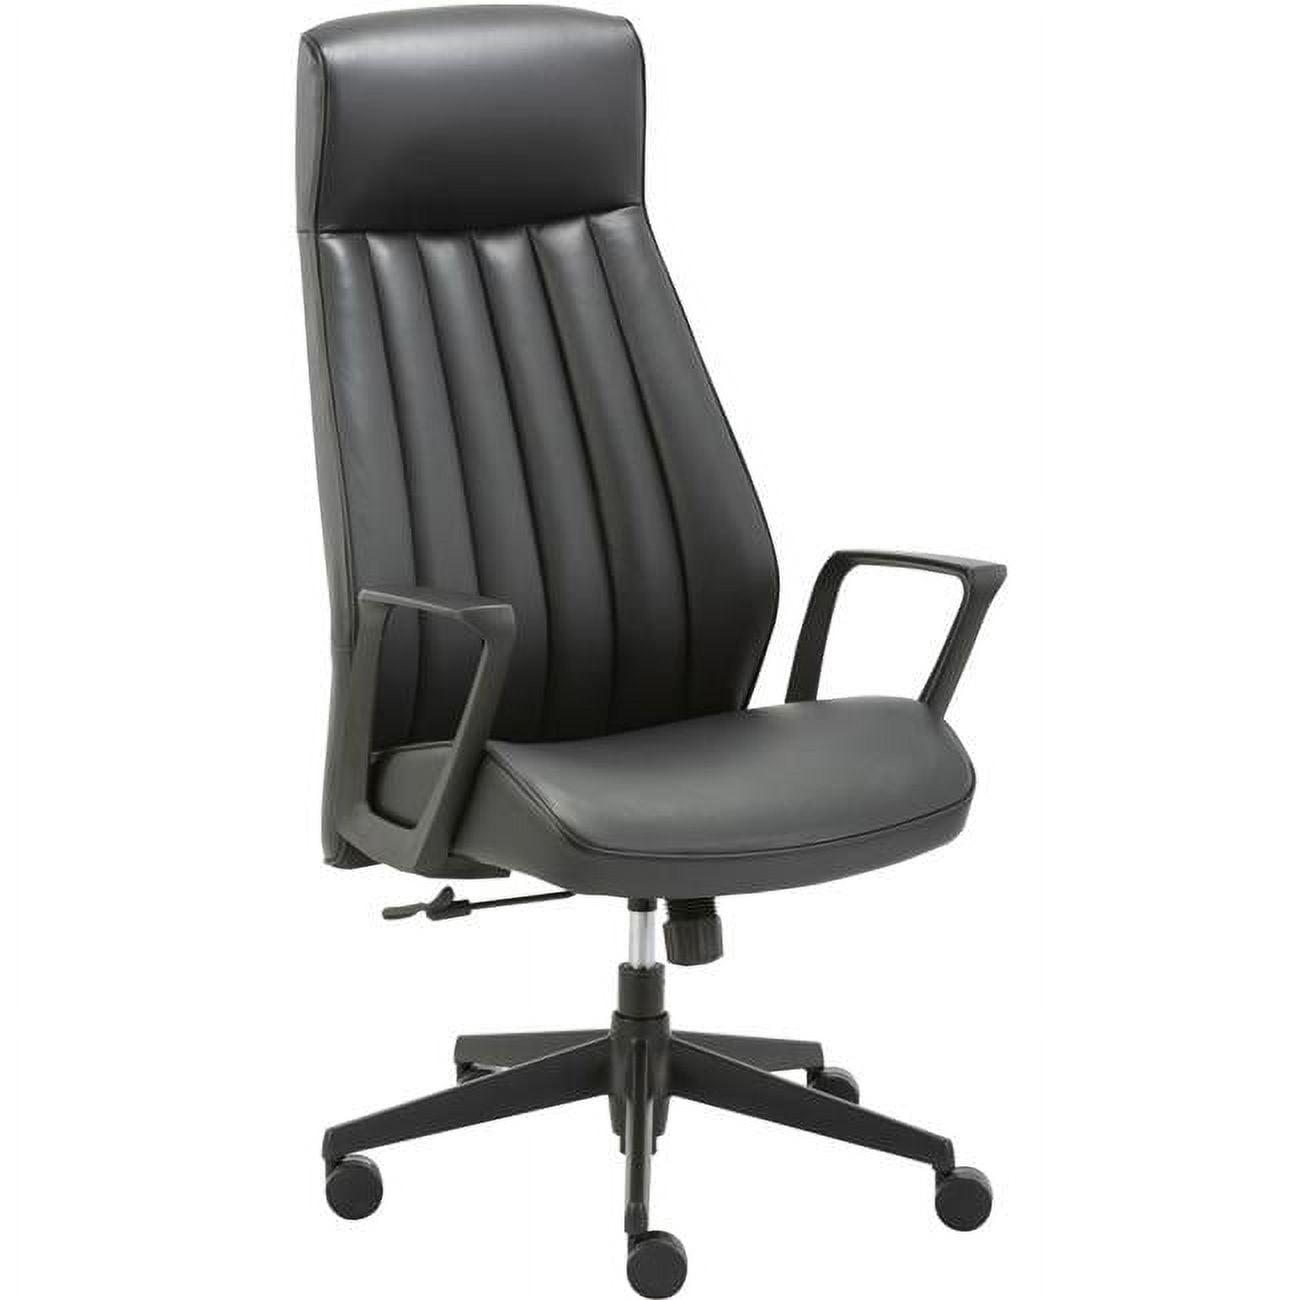 Executive High-Back Black Bonded Leather Swivel Chair